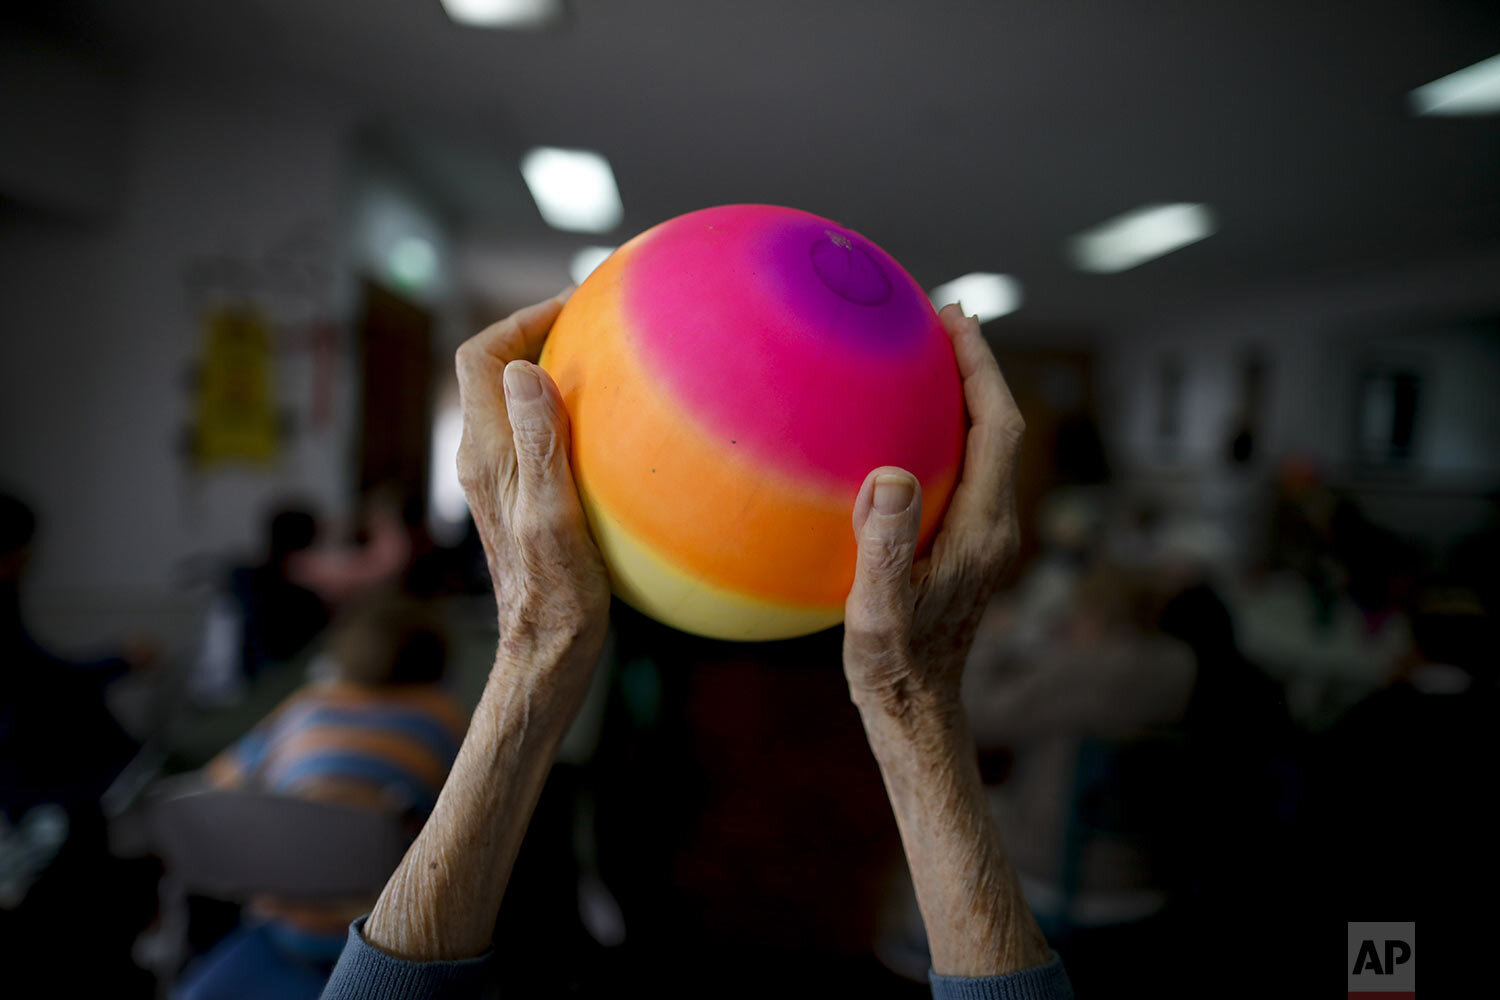  Delia Solbach holds up a ball during an exercise class at the Reminiscencias residence for the elderly in Tandil, Argentina, Monday, April 5, 2021. (AP Photo/Natacha Pisarenko) 